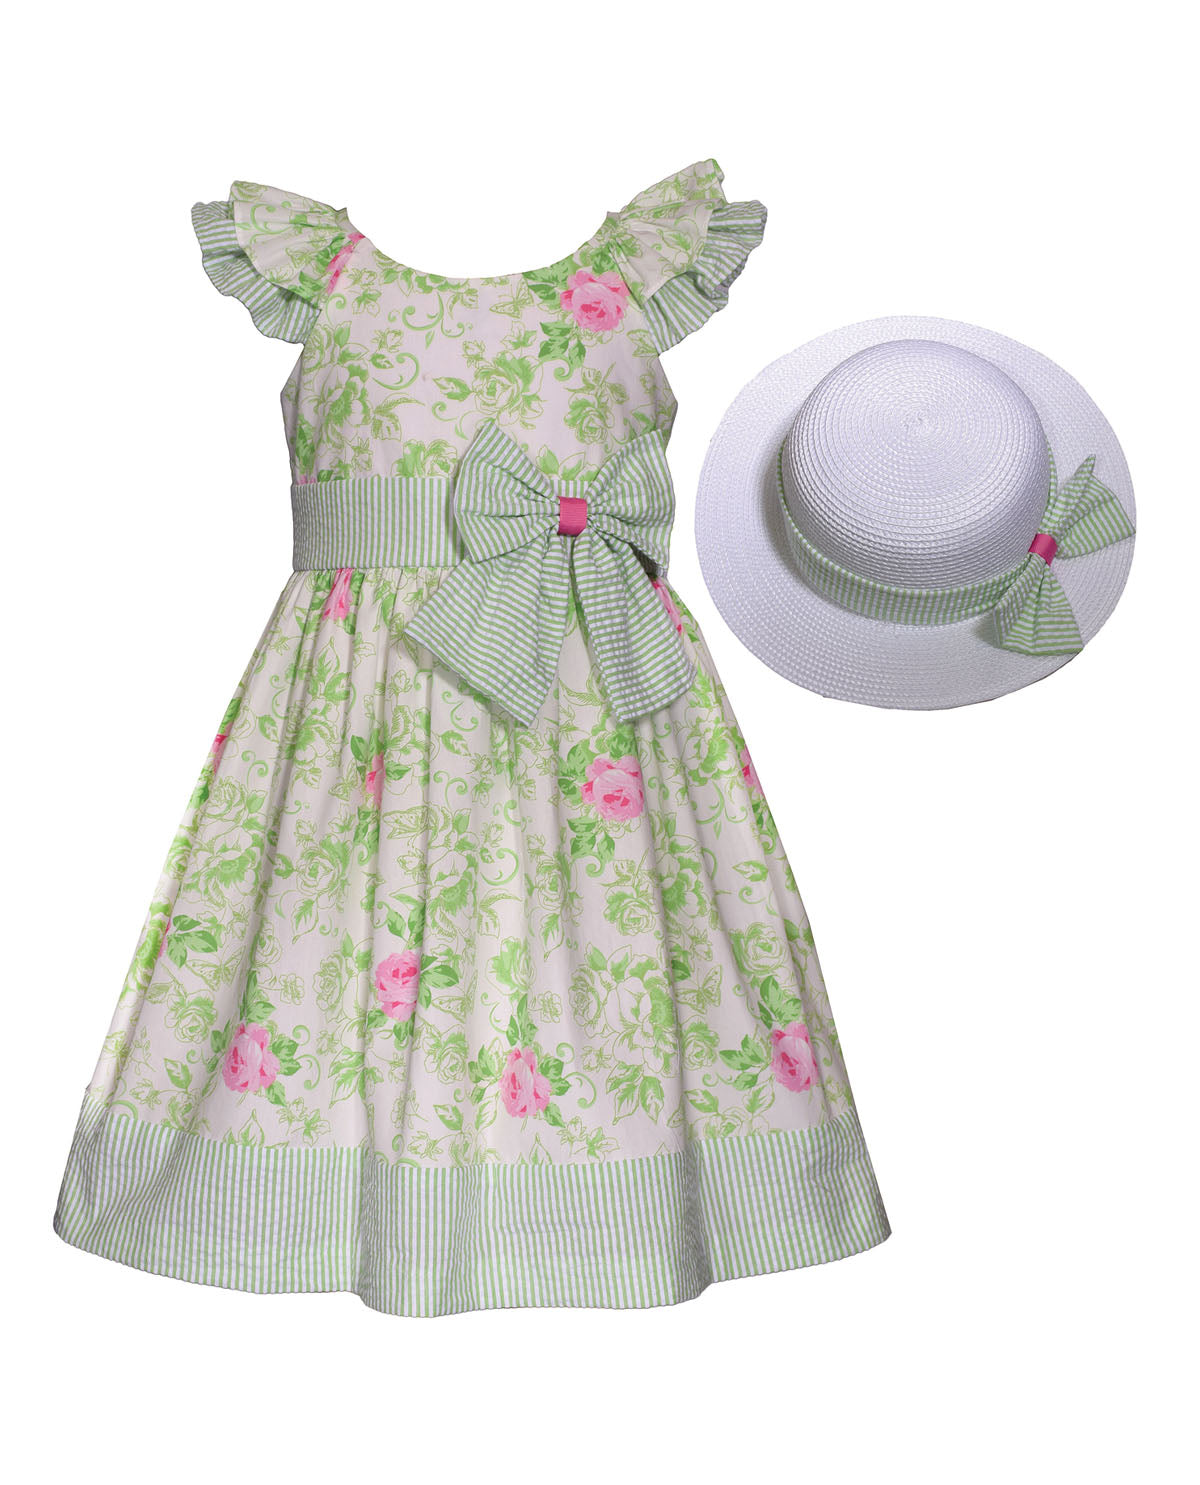 Bonnie Jean 7-16 Floral Dress with Matching Hat